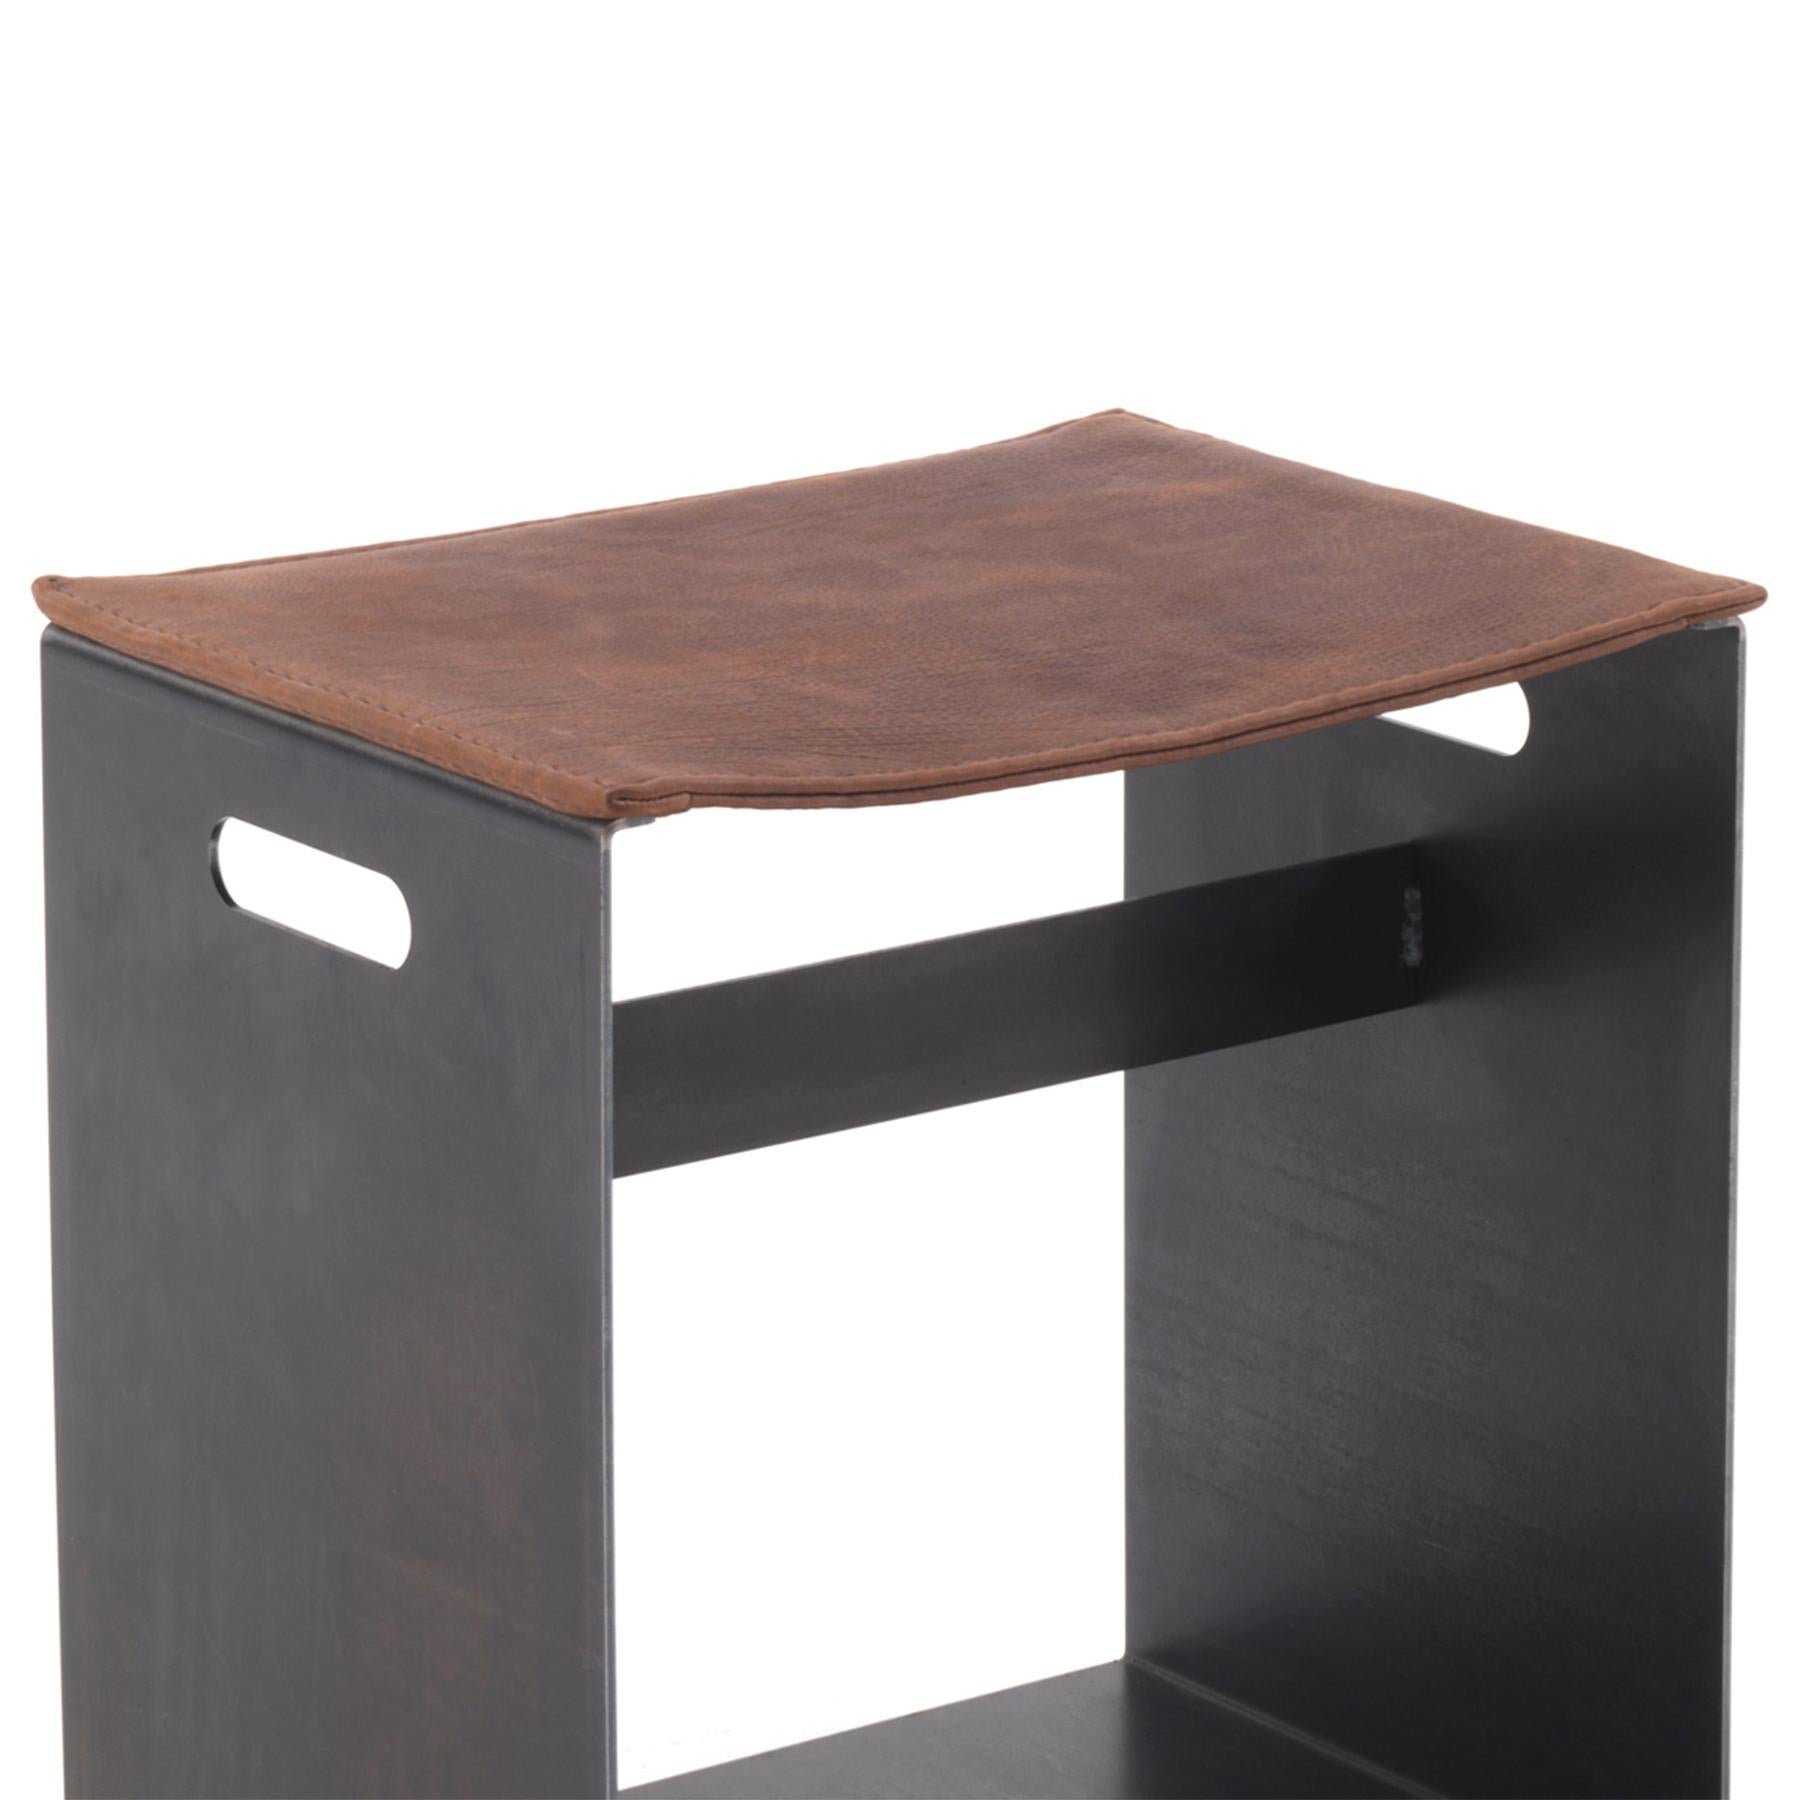 Stool leatheron with iron base in 
transparent lacquered finish. With high
quality brown genuine leather seat.